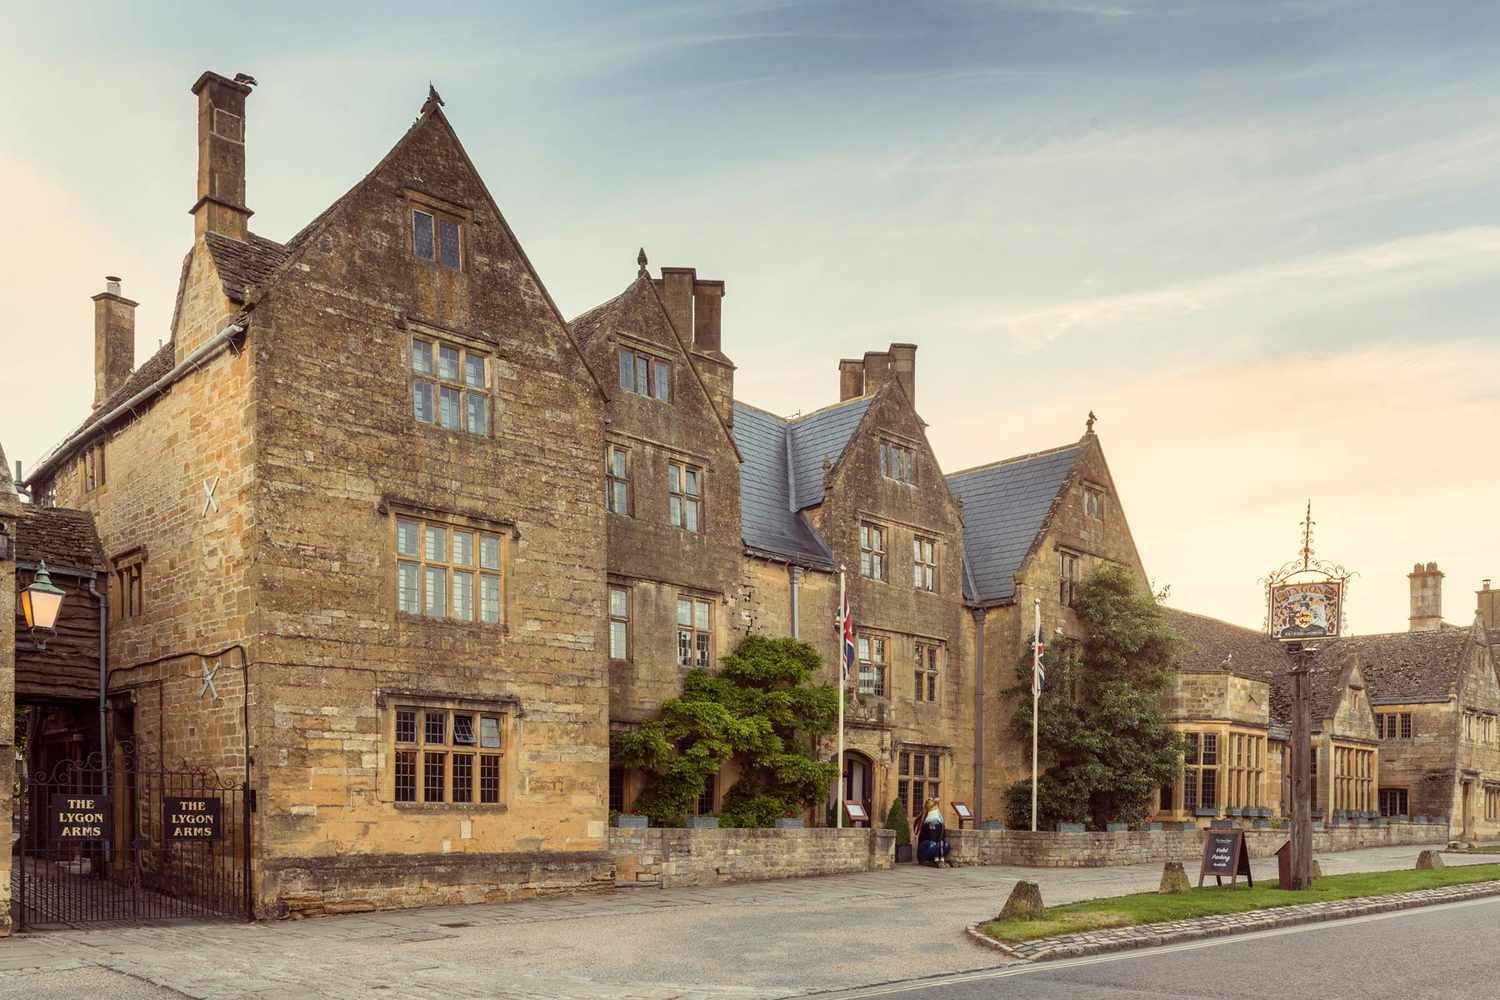 This Cotswolds Hotel Dates Back to the 16th Century and Has Hosted Royals and Celebrities Alike